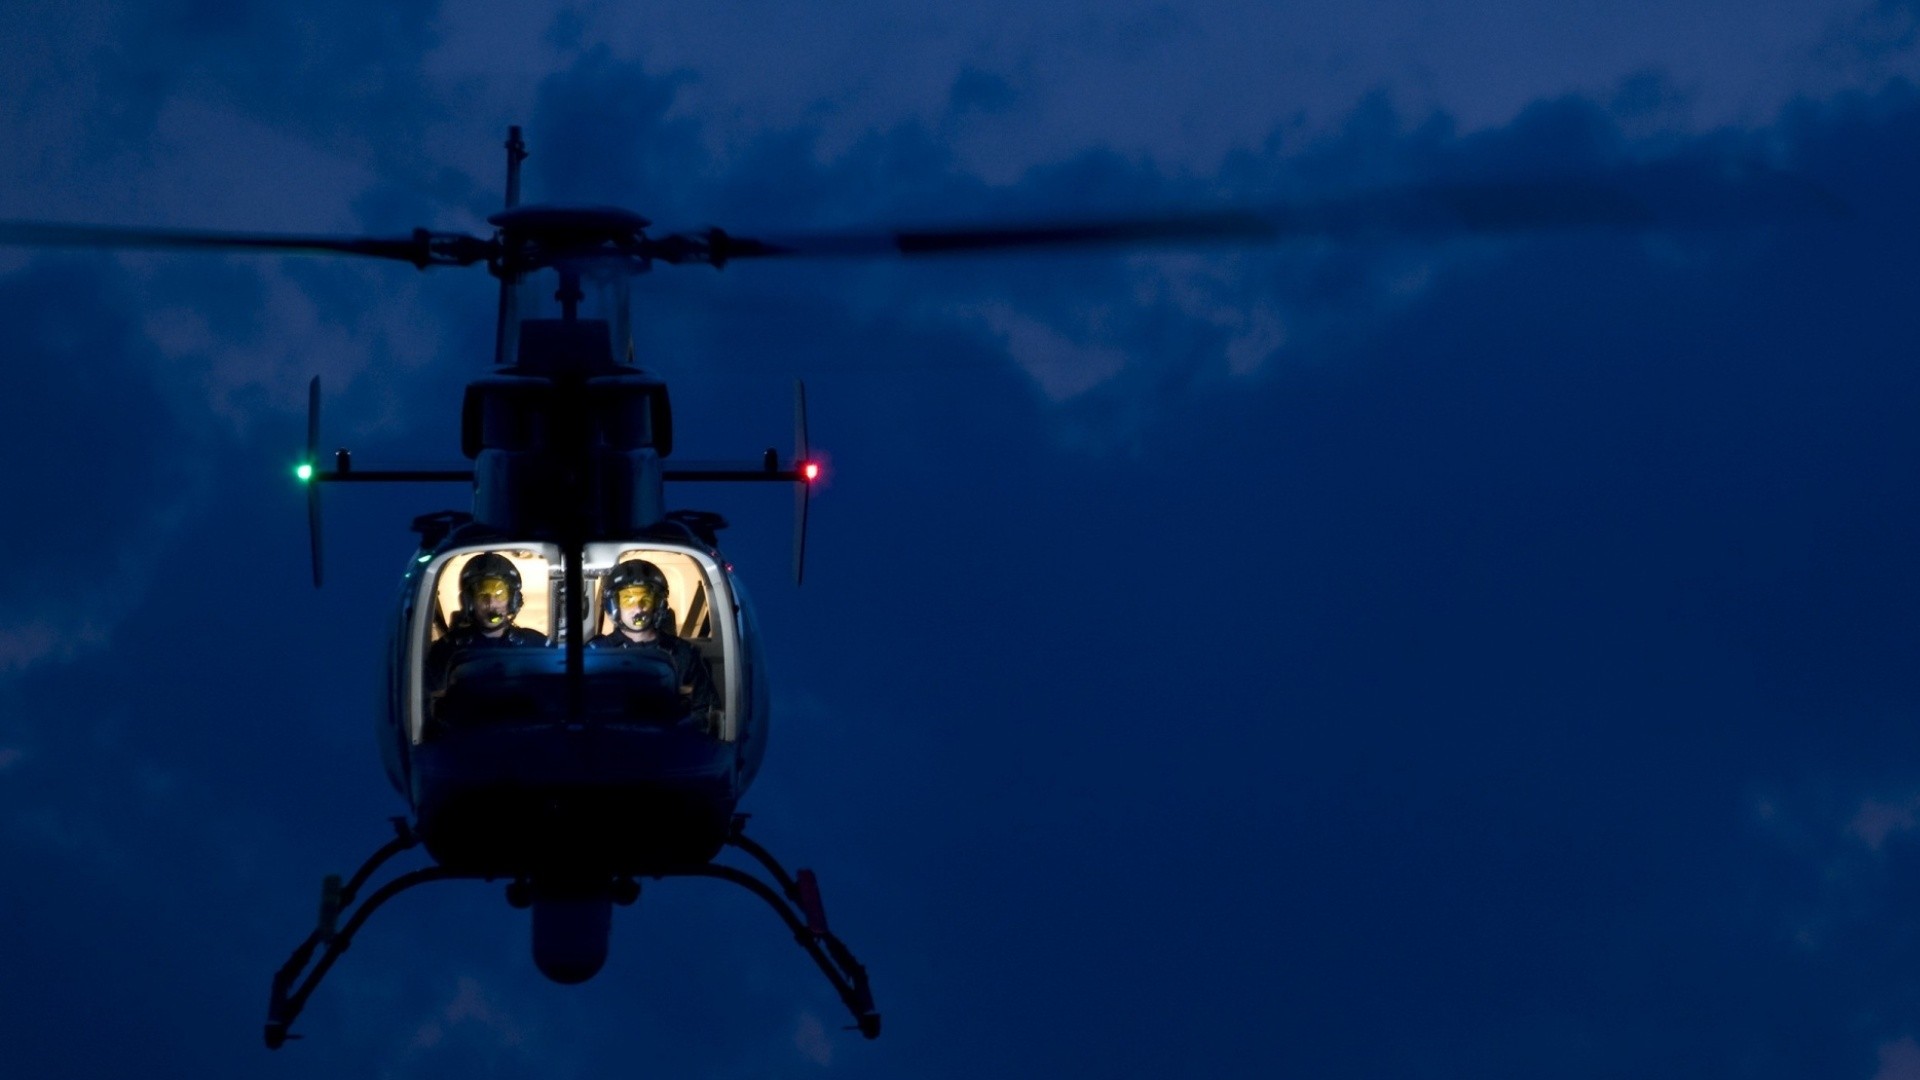 Vehicles Bell 407 HD Wallpaper | Background Image